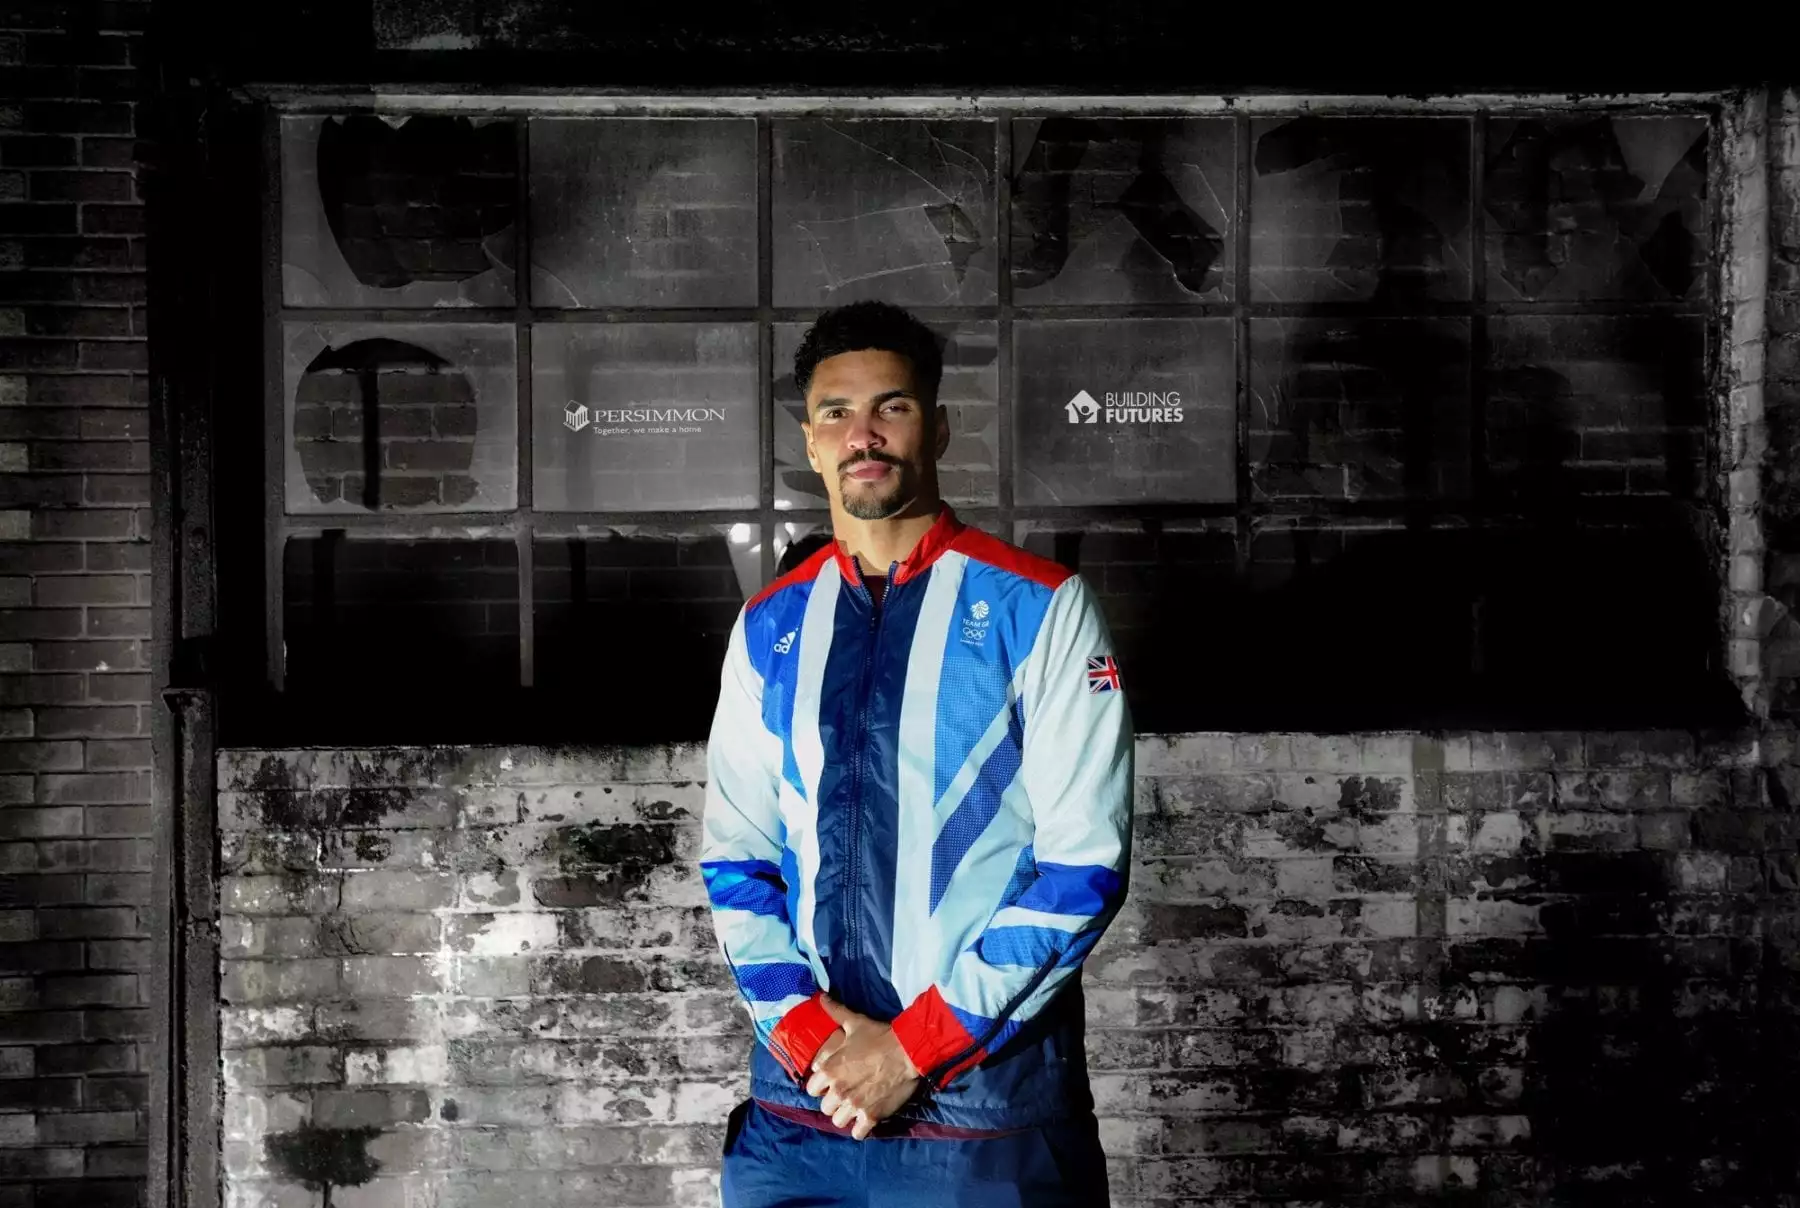 Anthony Ogogo stands against a wall with logos of Persimmon Homes and Building Futures